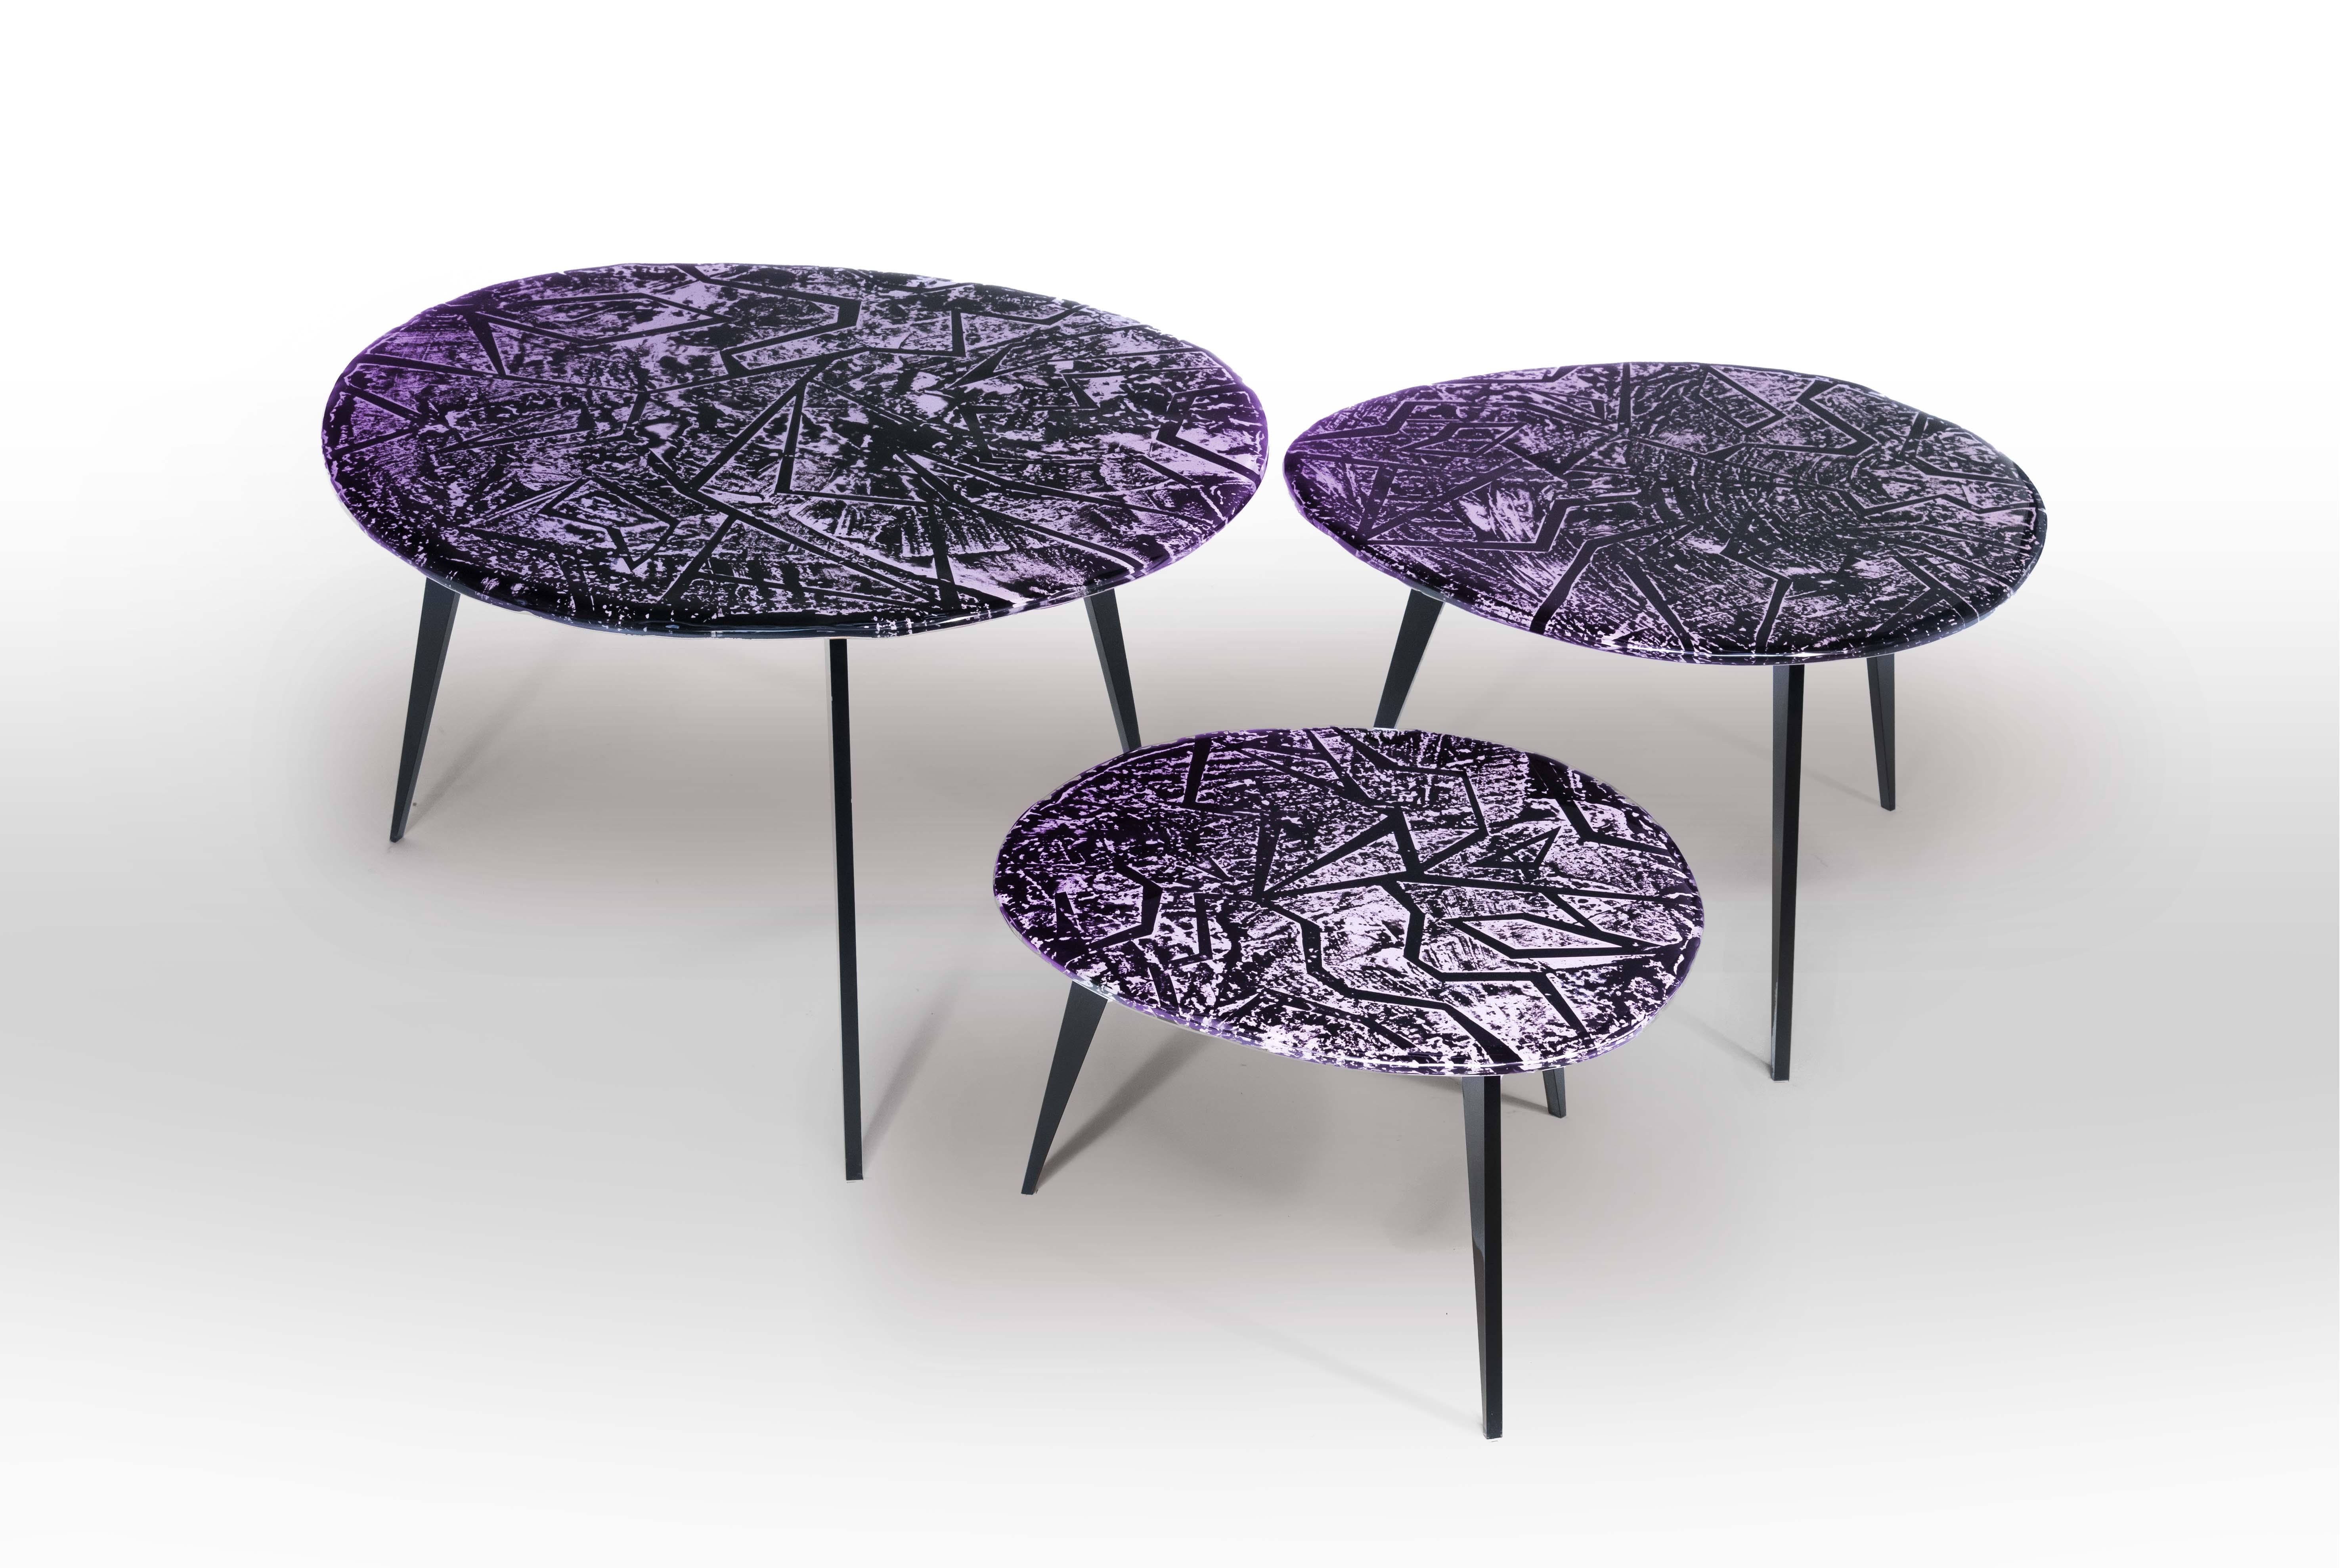 Italian Contemporary 'Zig-Zag' Coffee Table Amethyst Crystal and Brass by Ghirò Studio For Sale